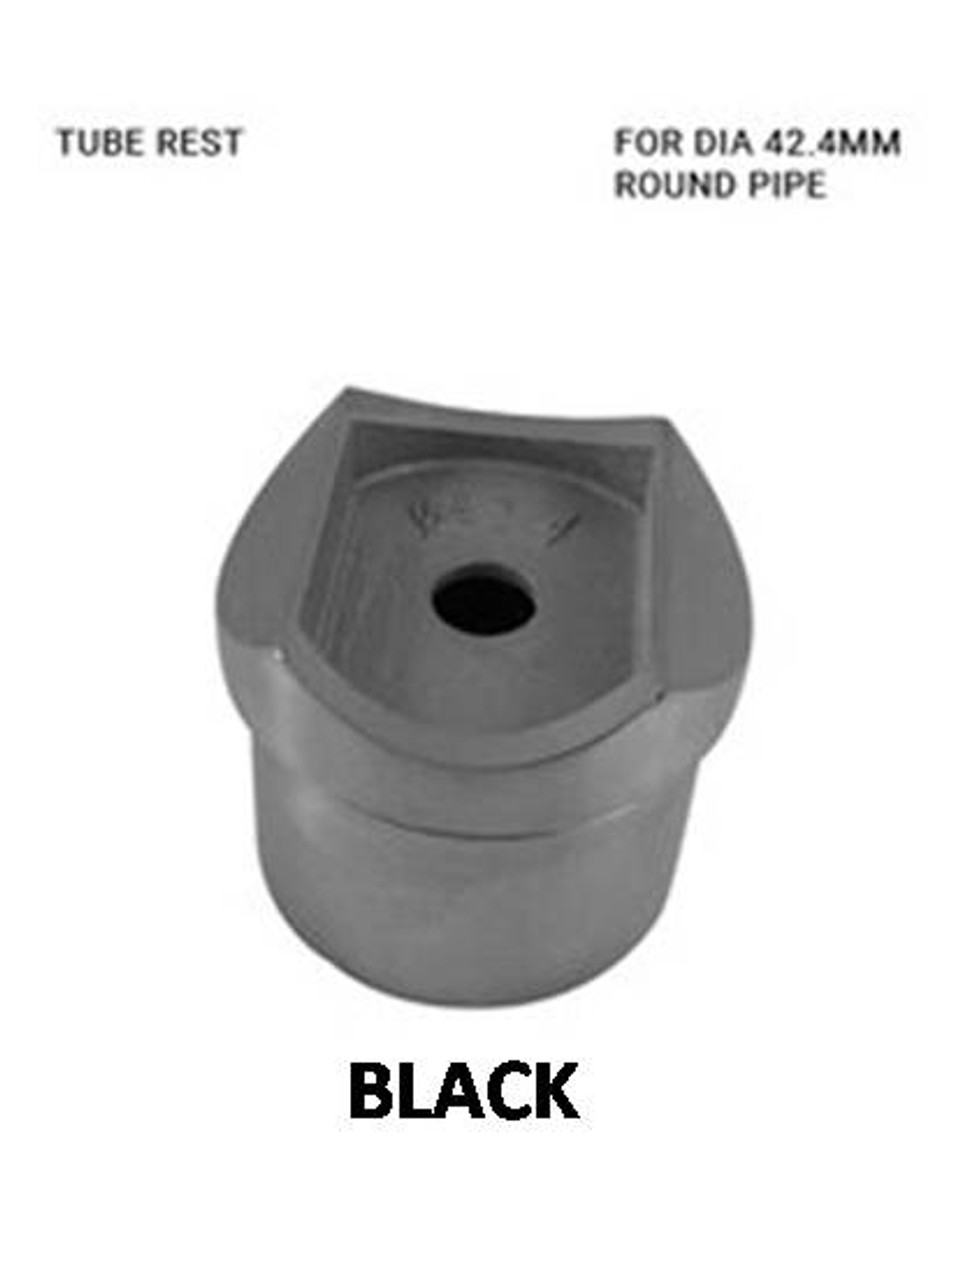 TR64524242EBS - BL Tube Rest For 42.4 Dia 2mm Thick Round Pipe